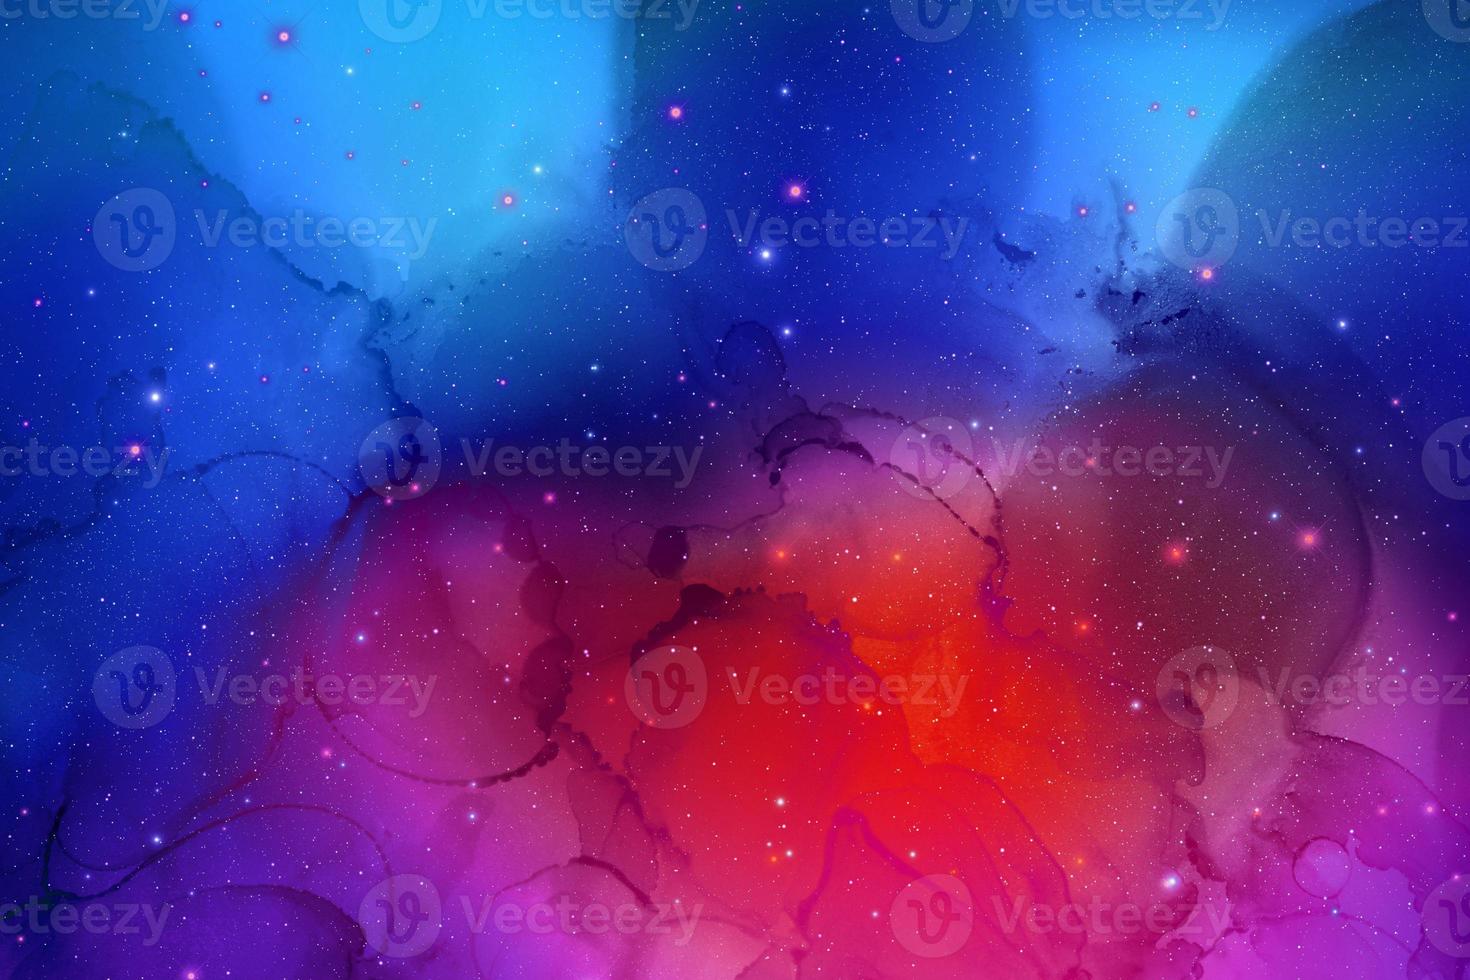 the background of abstract galaxies with stars and planets in blue and red motifs of the universe night light space photo